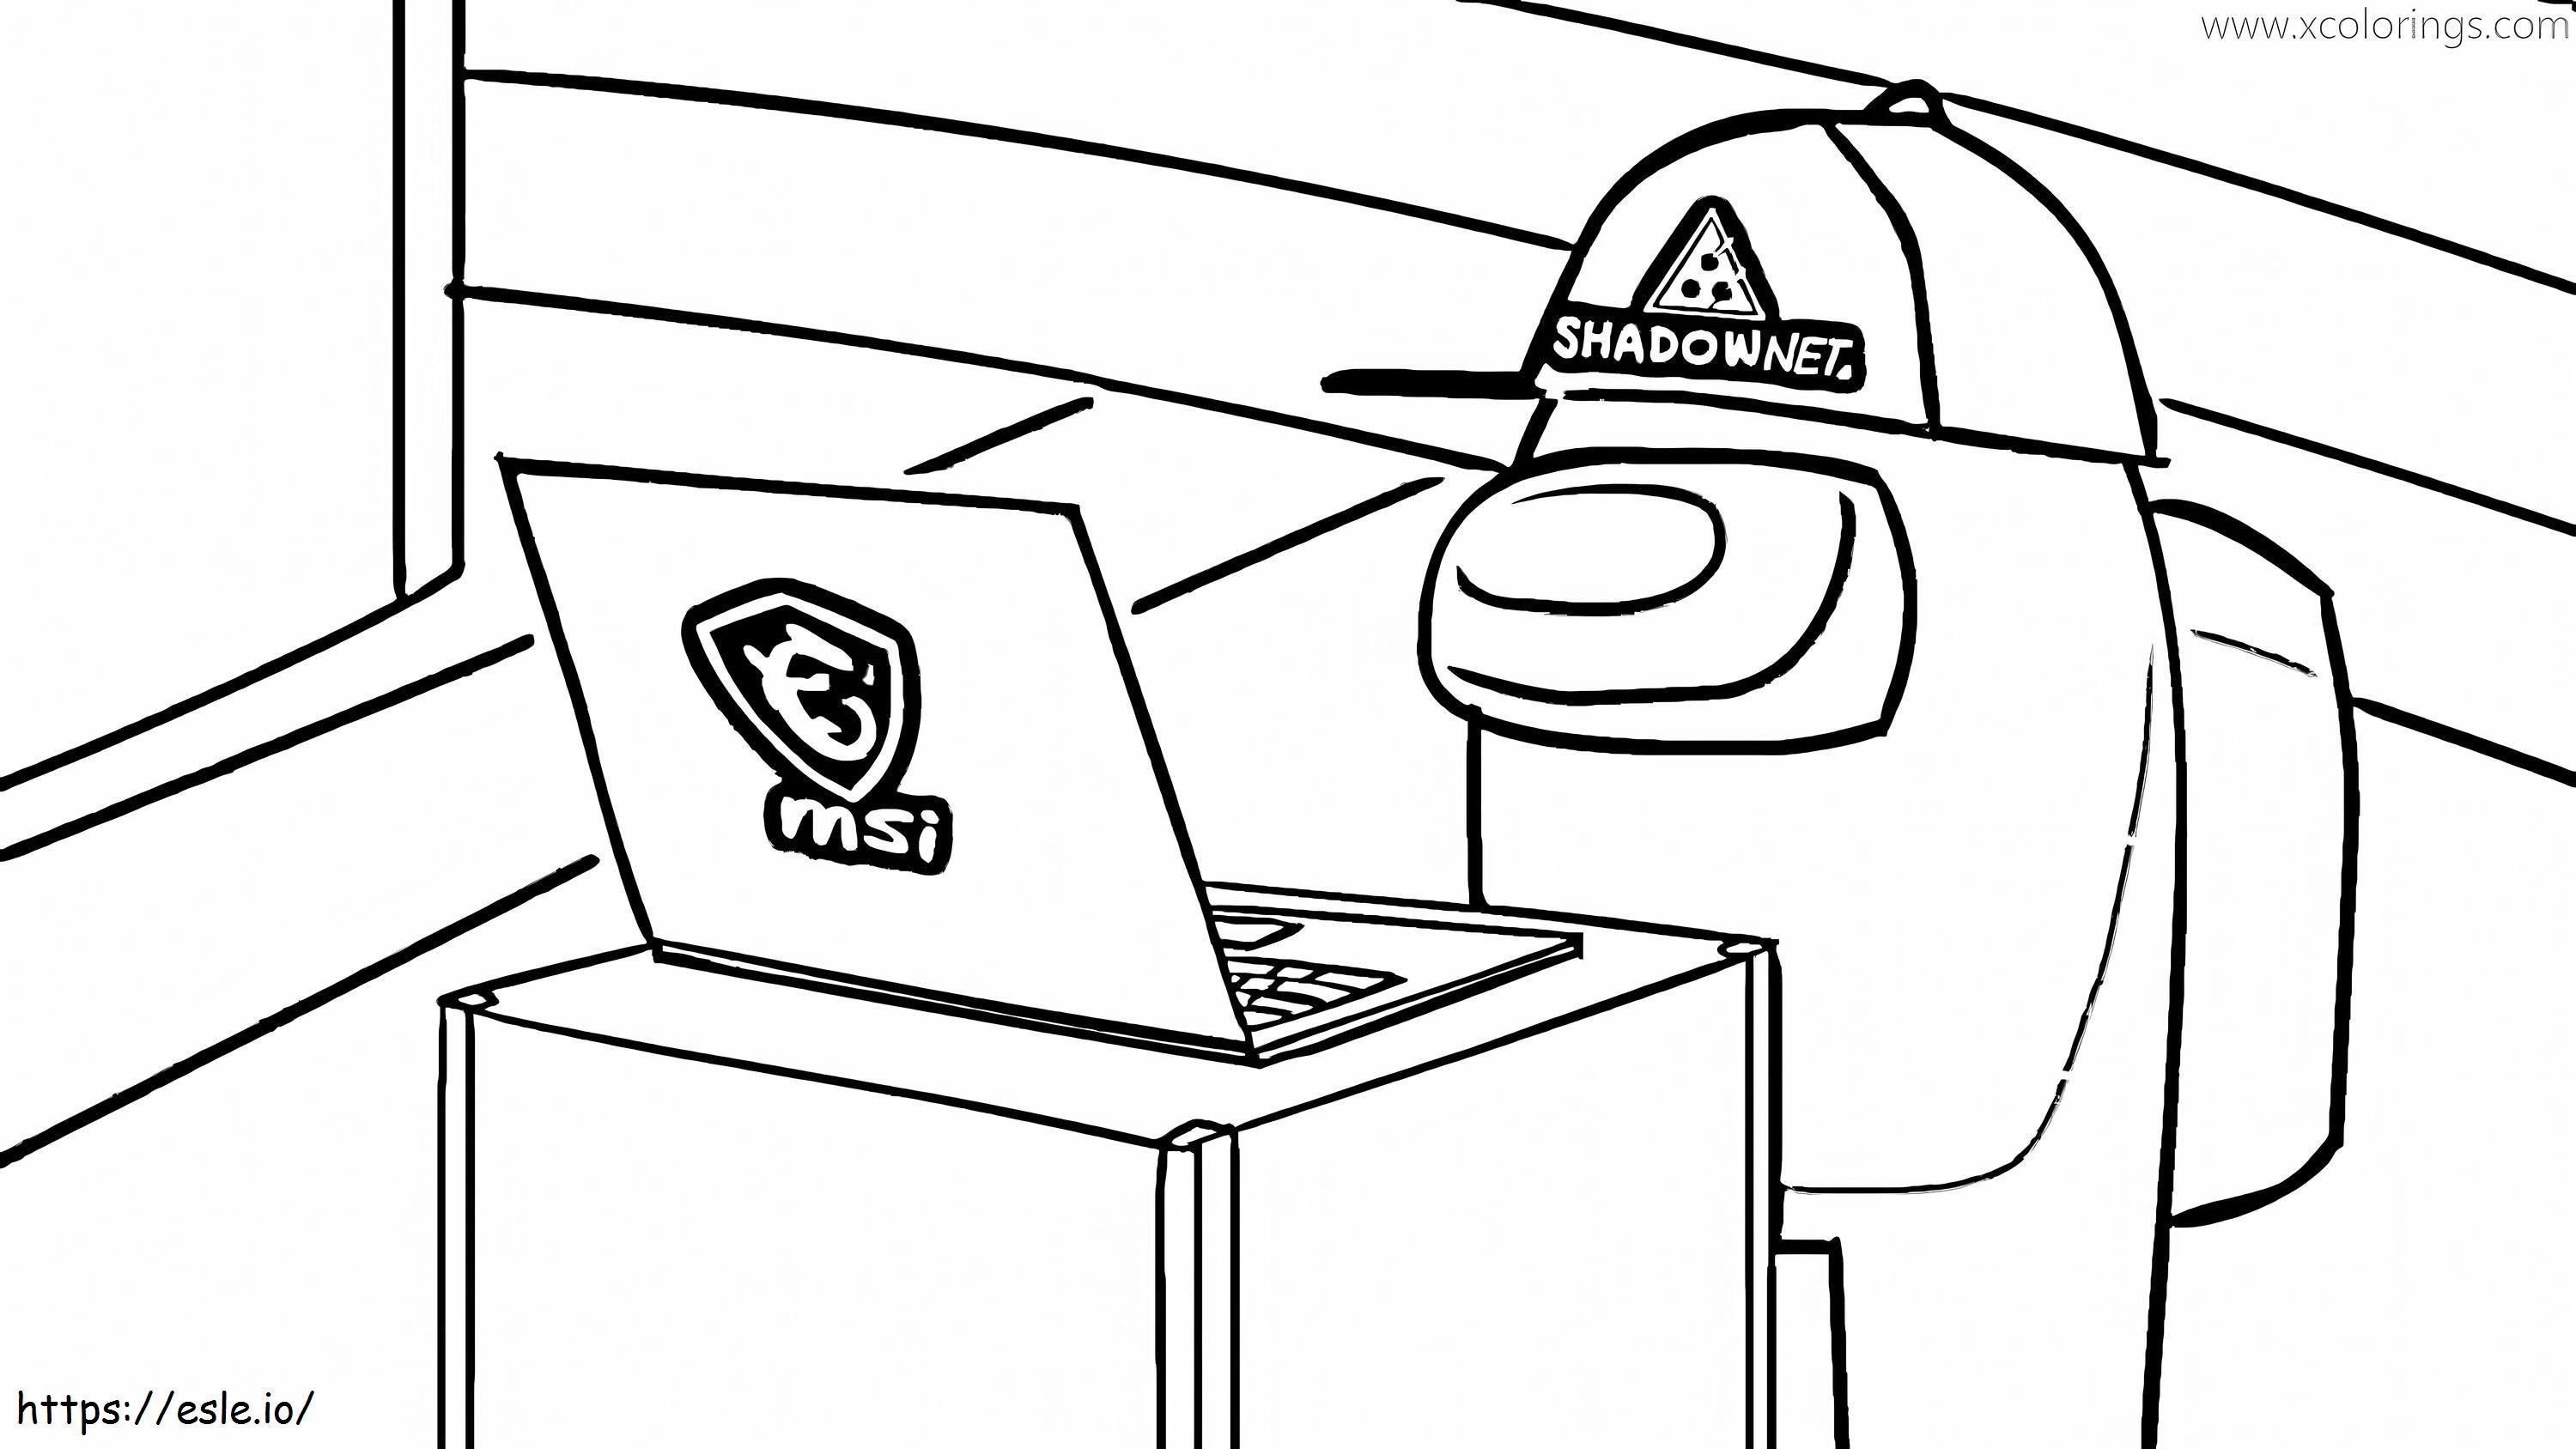 Among Us Working With Laptop coloring page